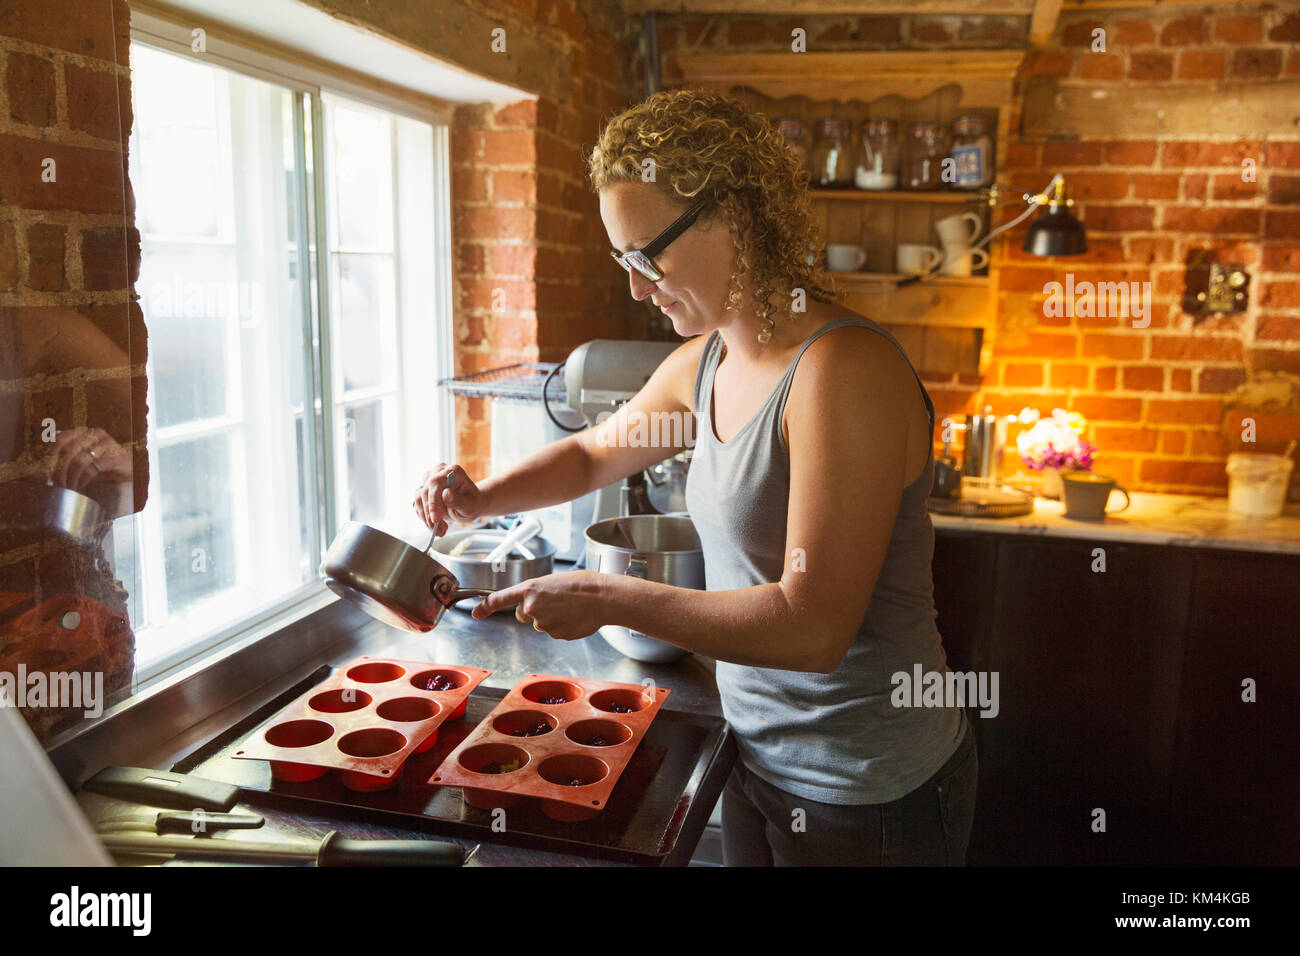 Side view of woman standing in a kitchen, baking, filling silicone molds. Stock Photo